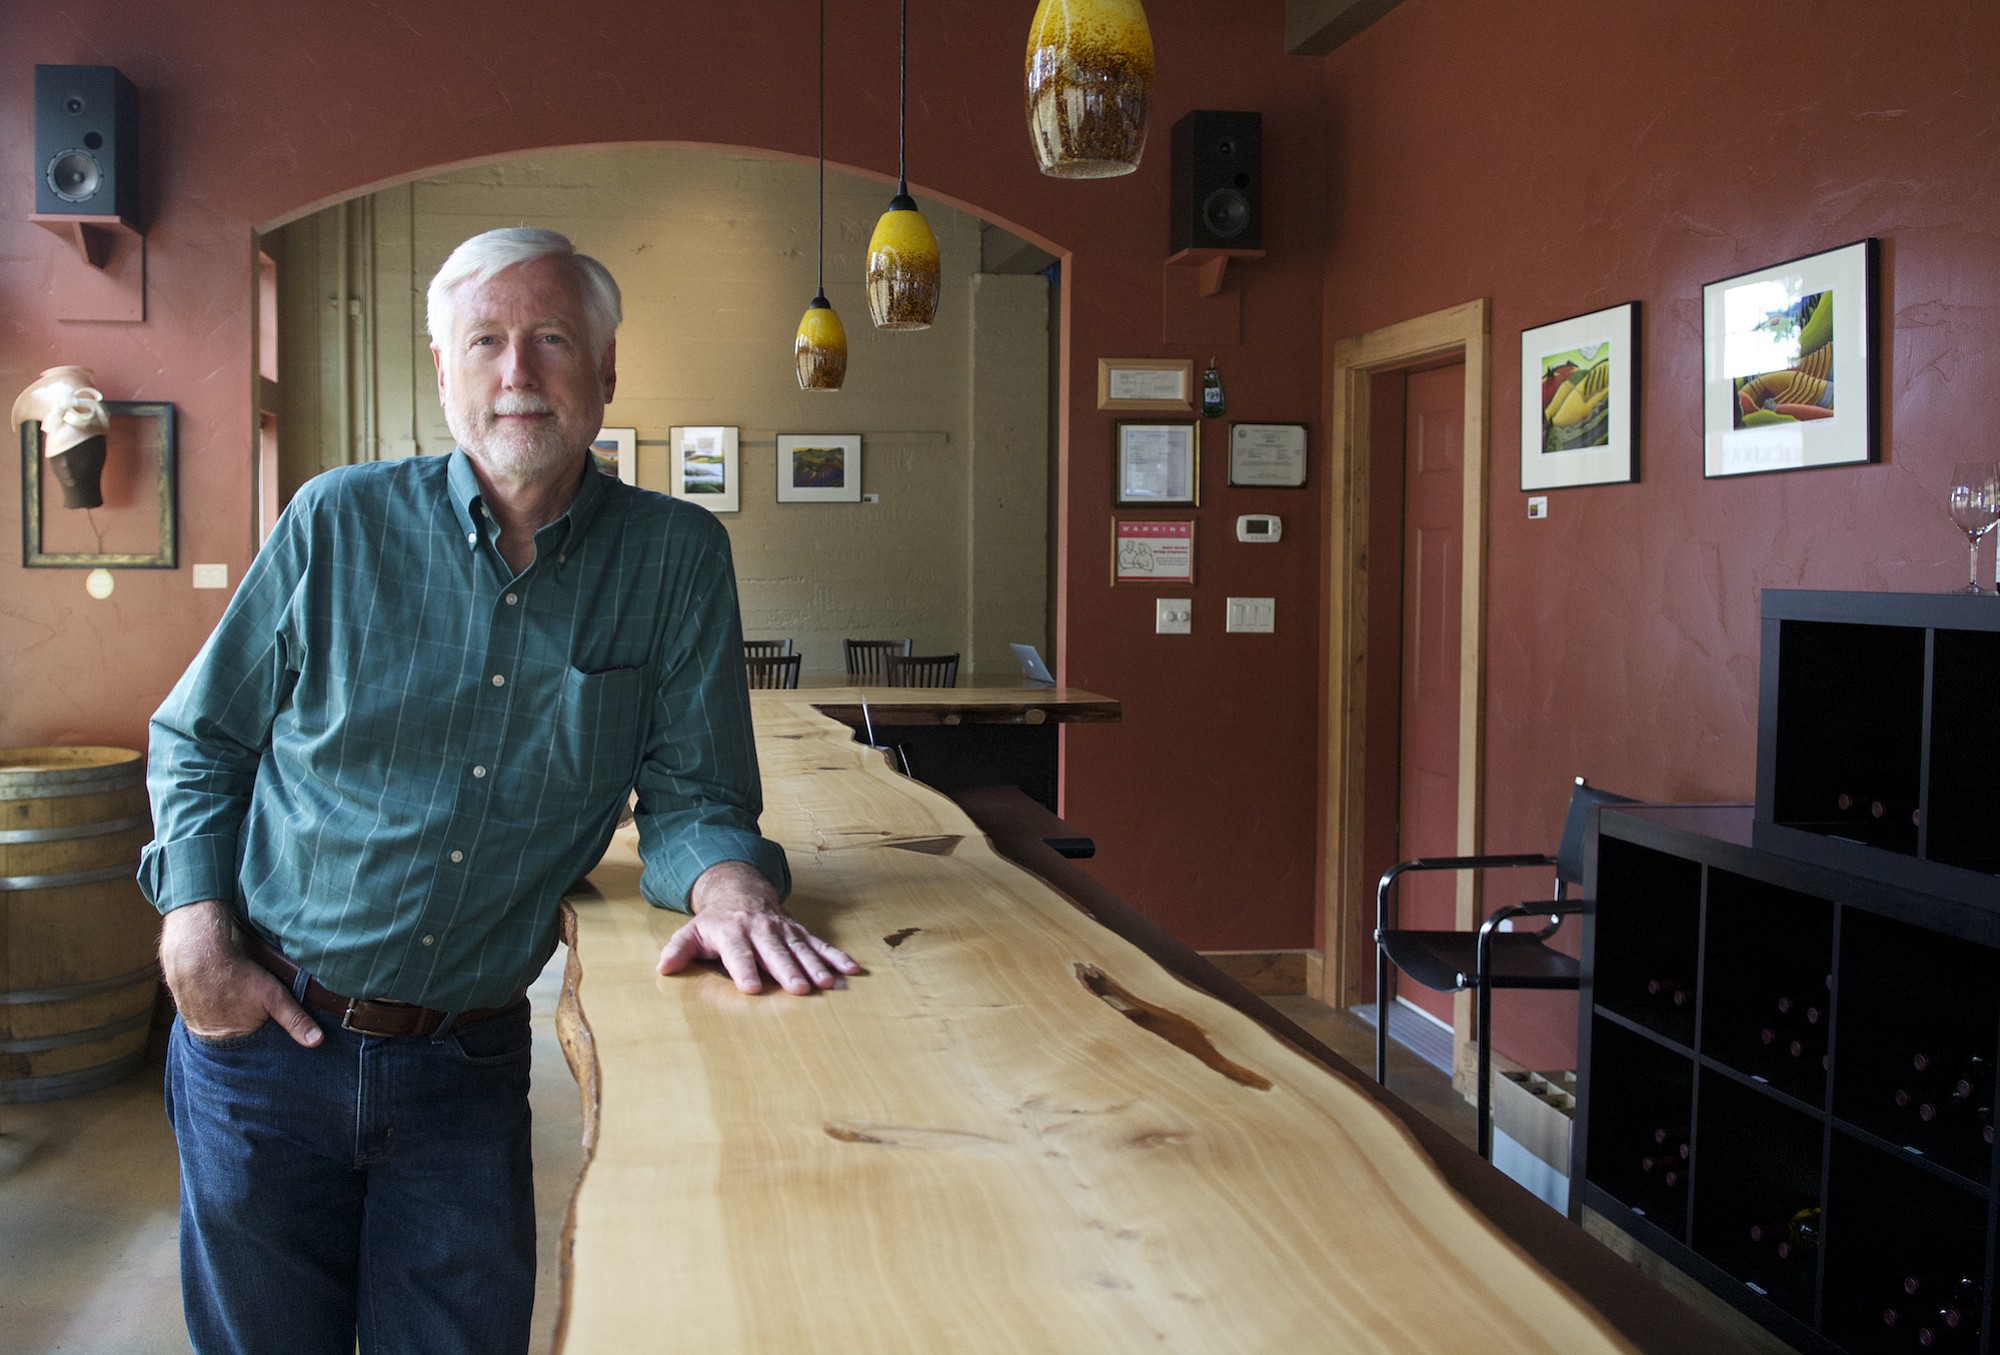 Mark Mahan, co-owner of Burnt Bridge Cellars, said a student group from Washington State University Vancouver's business assistance program helped him see possibilities for expanding the winery's online wine sales.